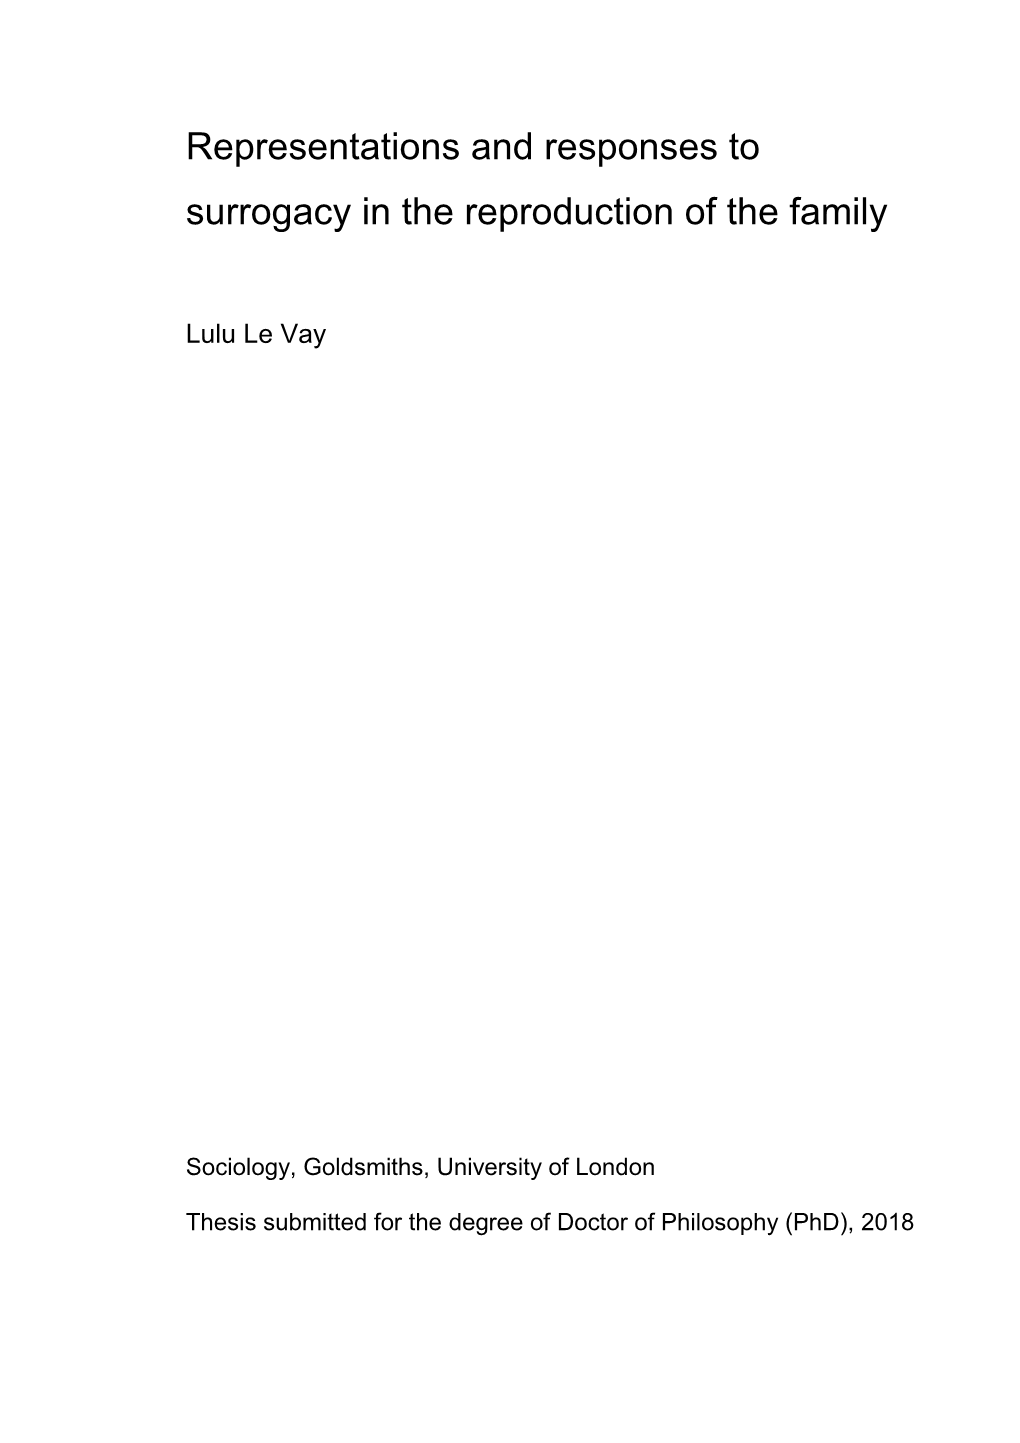 Representations and Responses to Surrogacy in the Reproduction of the Family